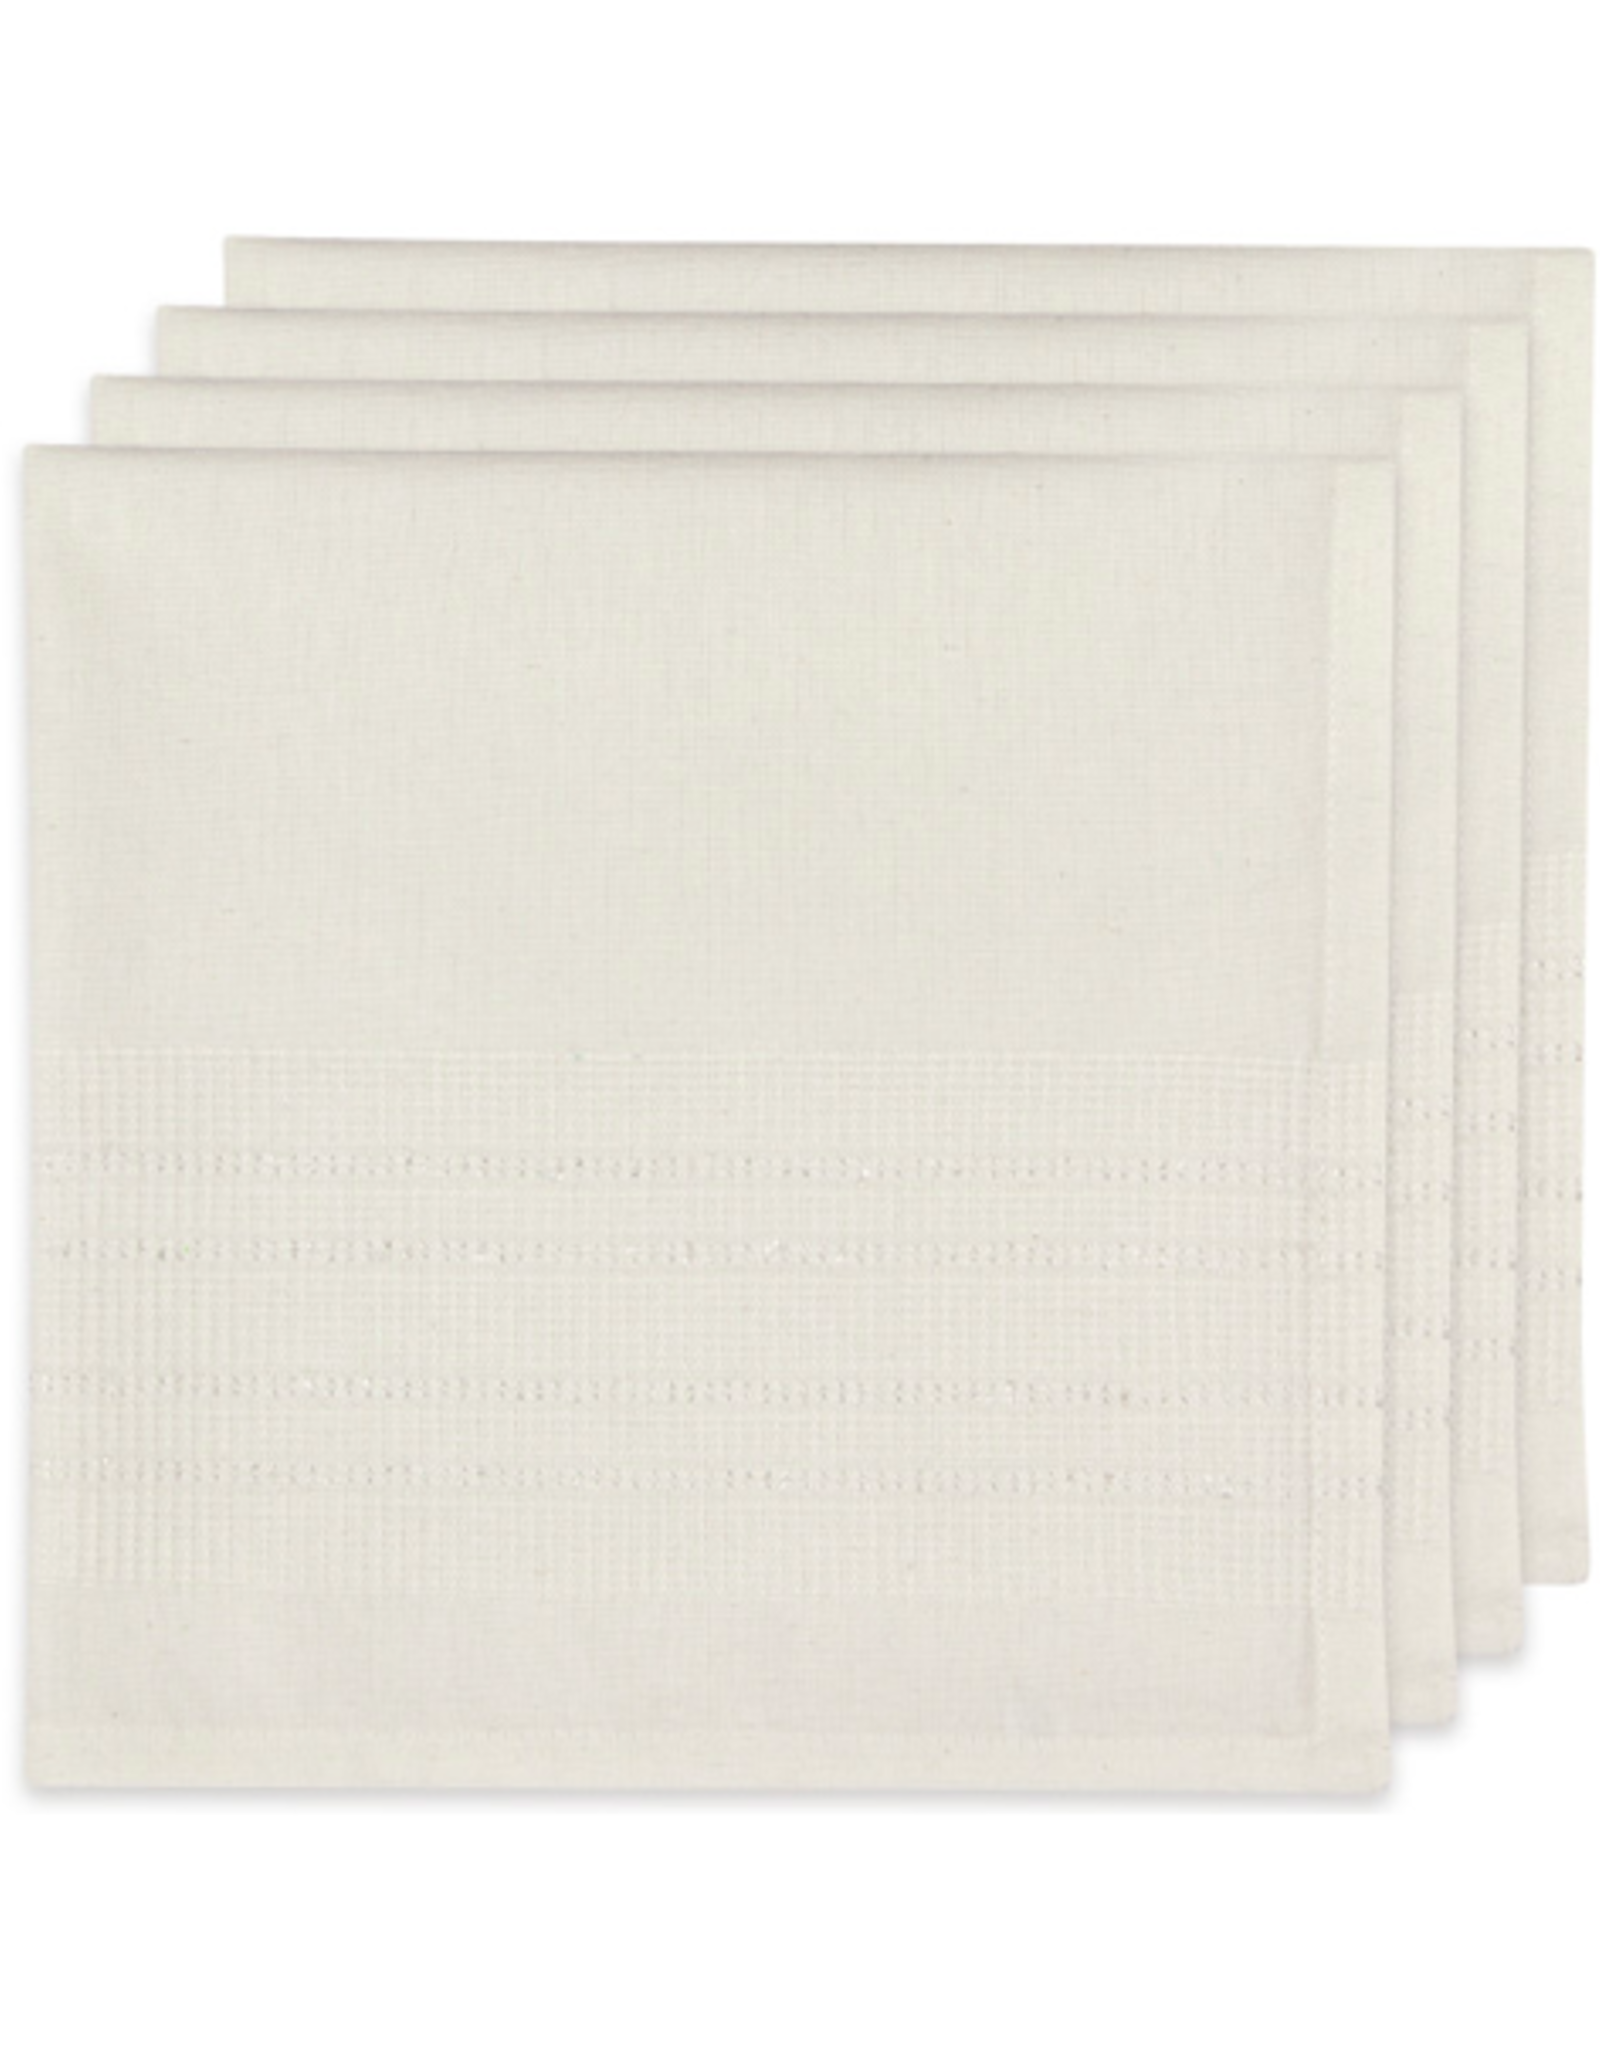 The Independent Mercantile Co. DCA - Napkin / Set of 4, Fine Weave, White